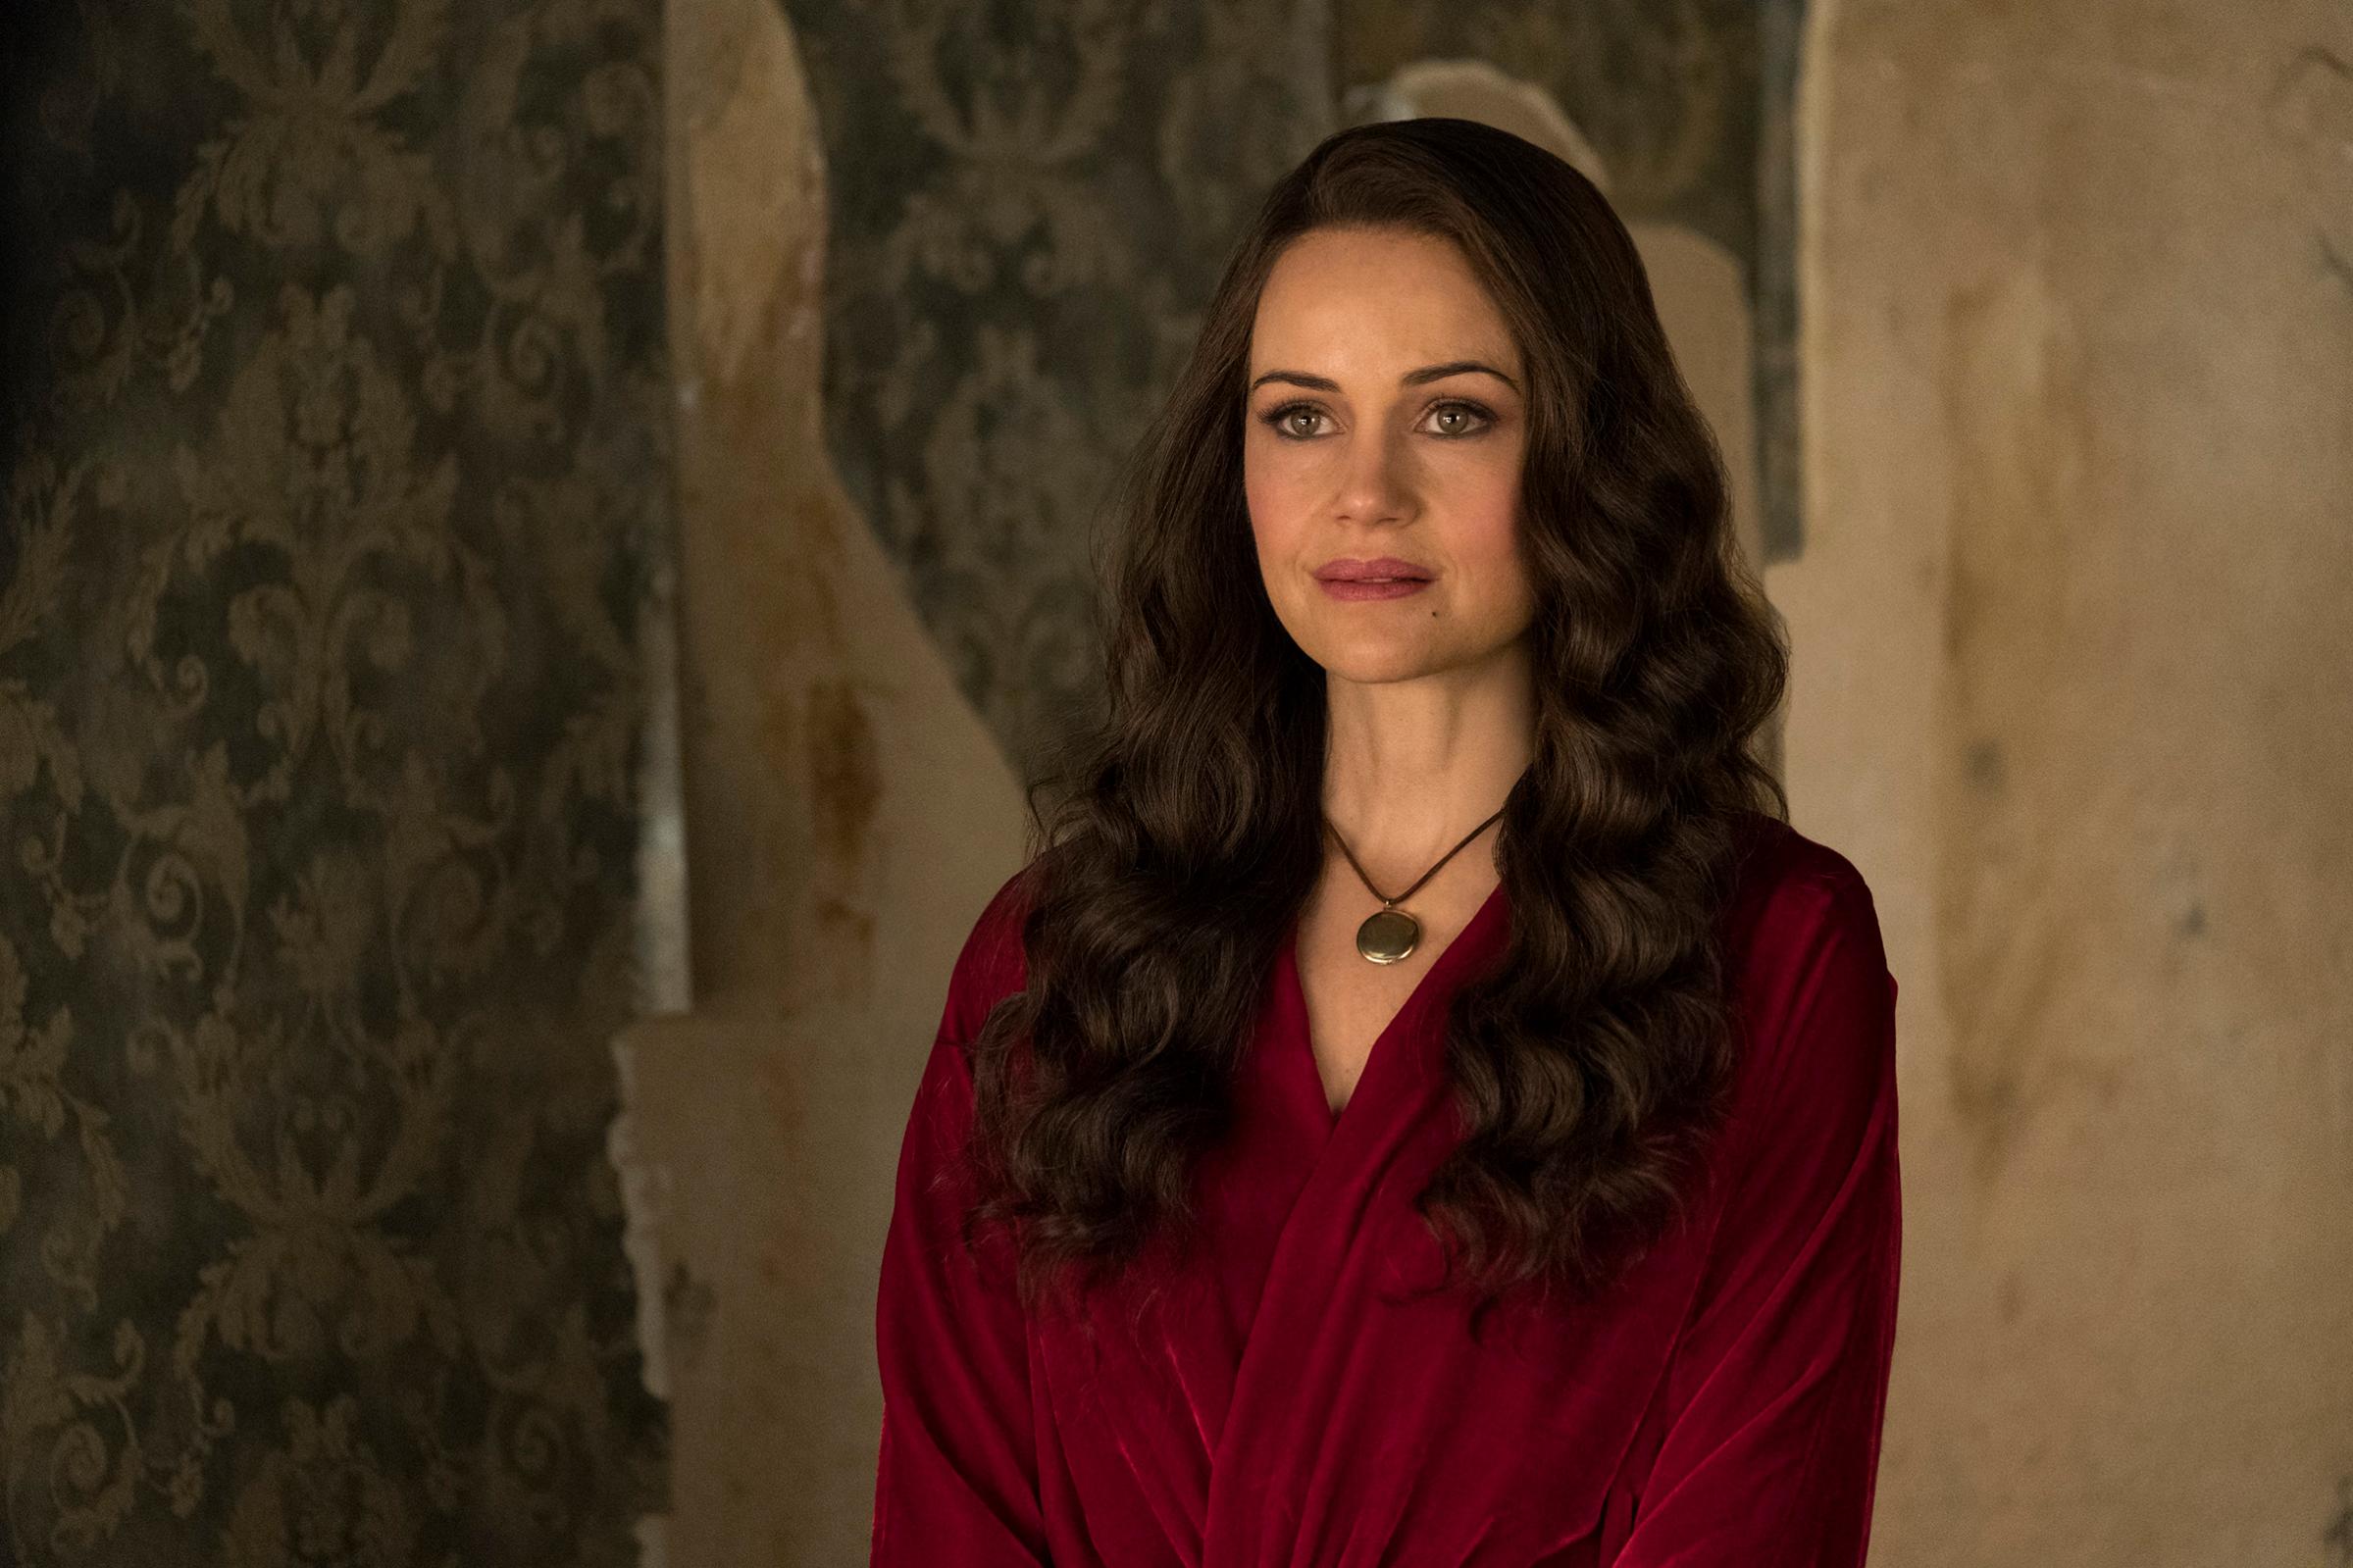 the haunting of hill house: Netflix reimagines Shirley Jackson’s classic novel in an emotional horror story that uses a haunted house as a metaphor for mourning.